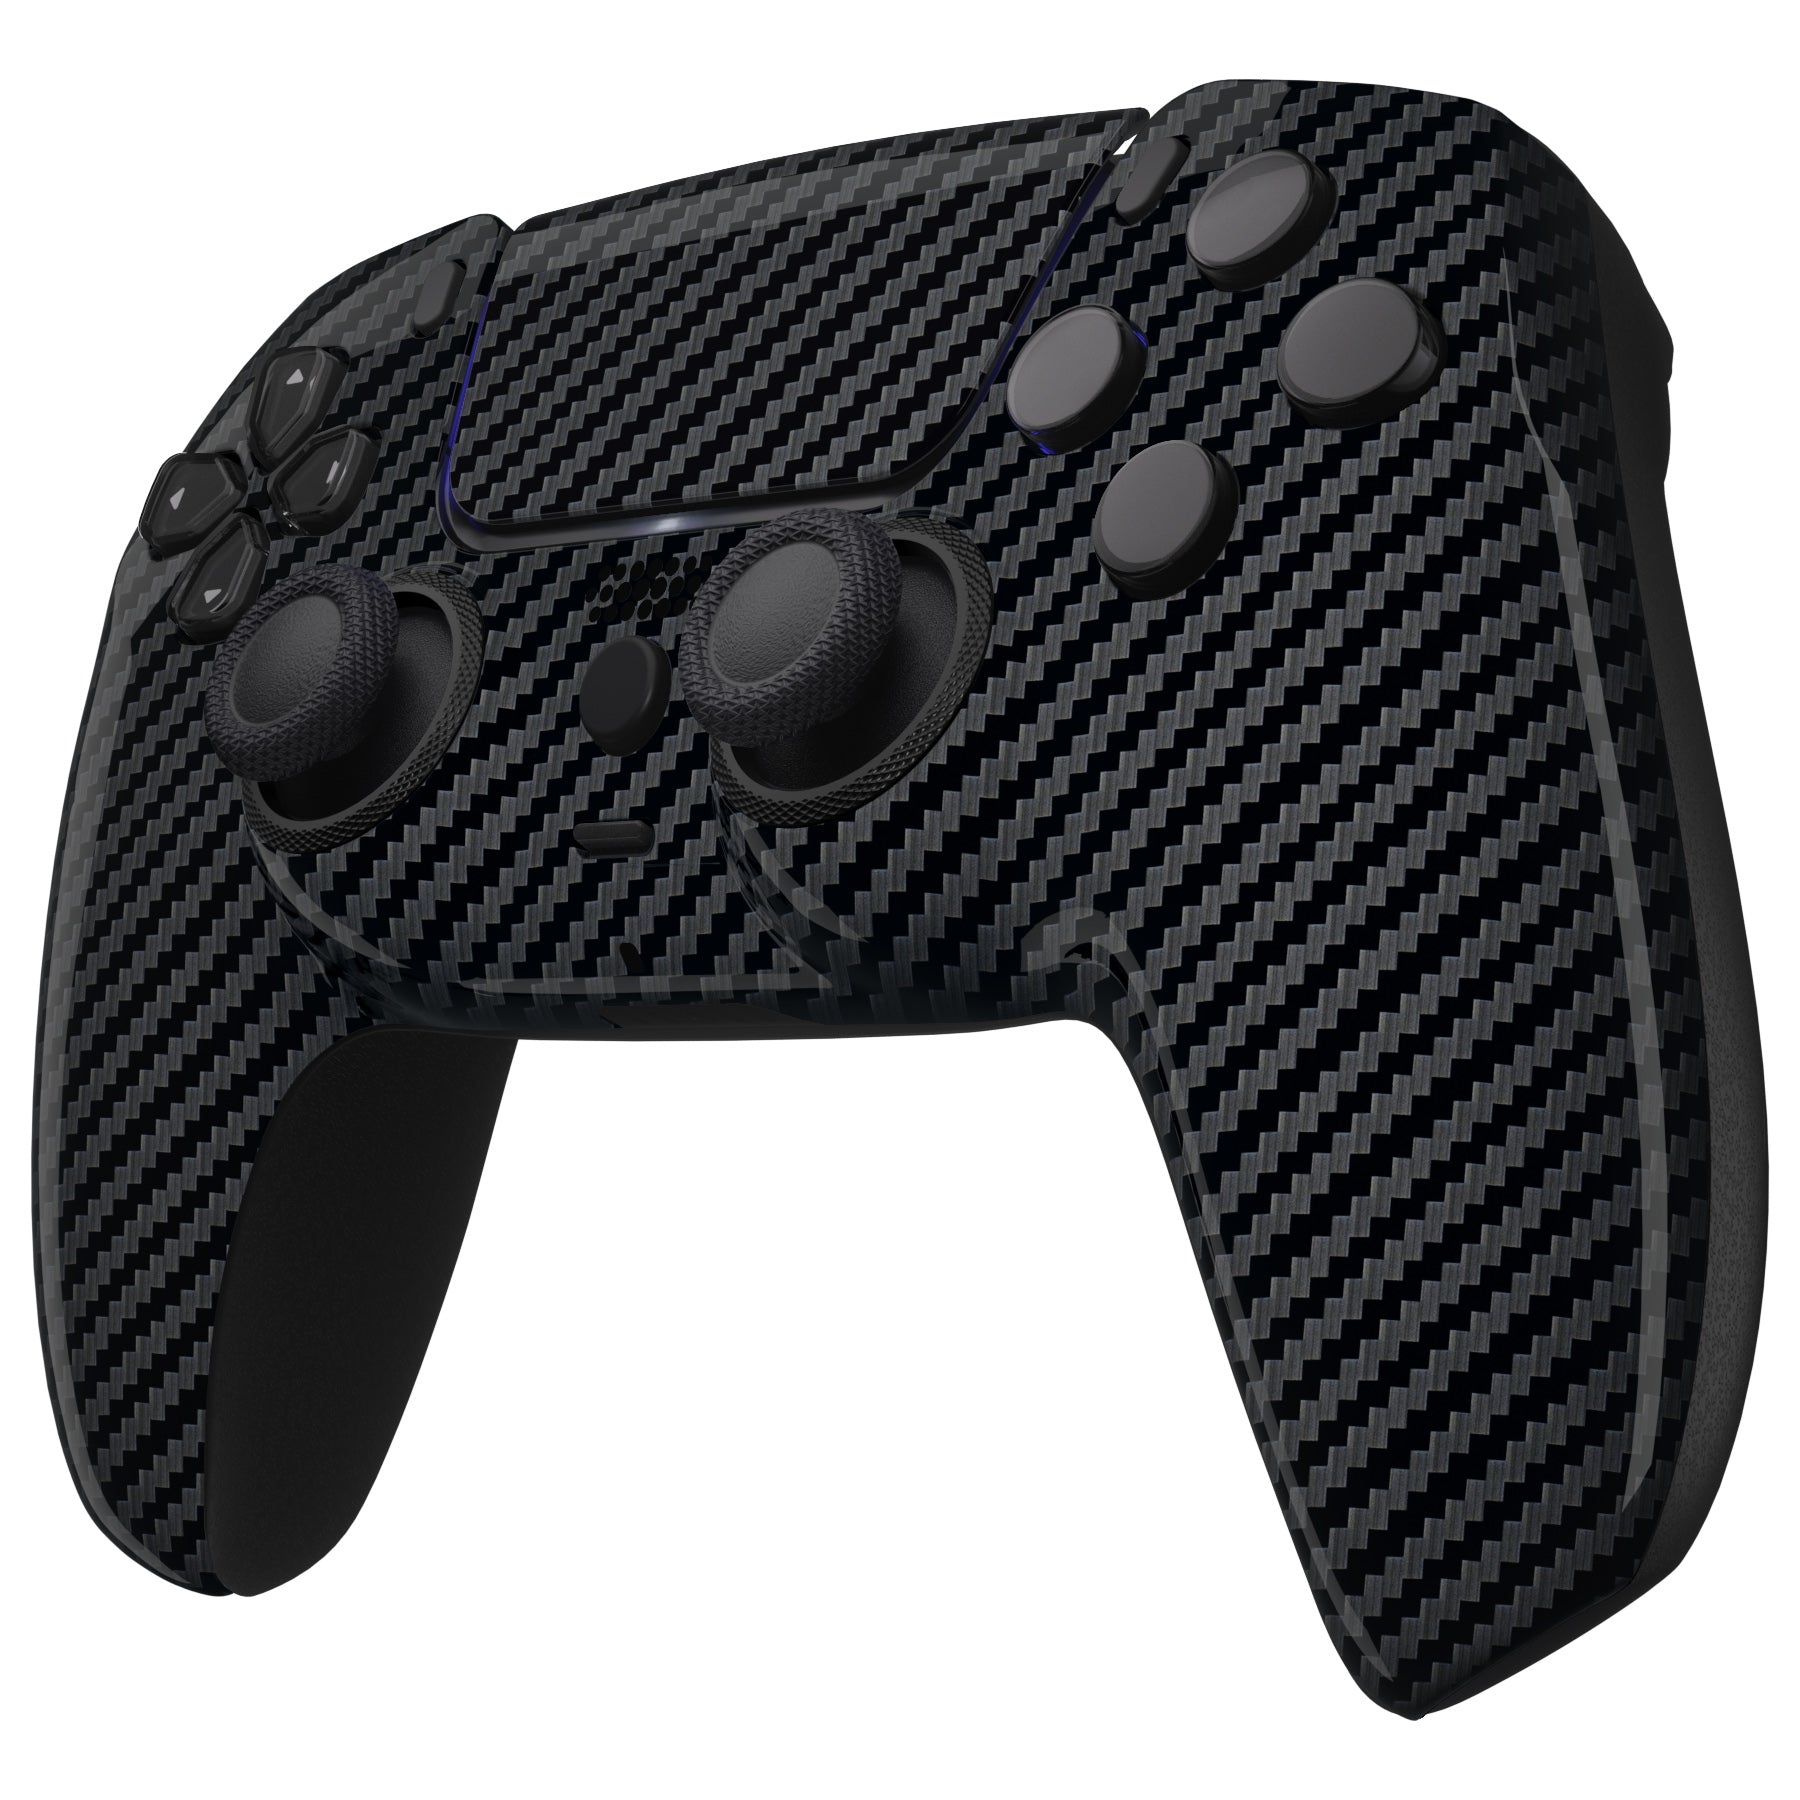 eXtremeRate LUNA Redesigned Replacement Front Shell with Touchpad  Compatible with PS5 Controller BDM-010/020/030/040 - Graphite Carbon Fiber